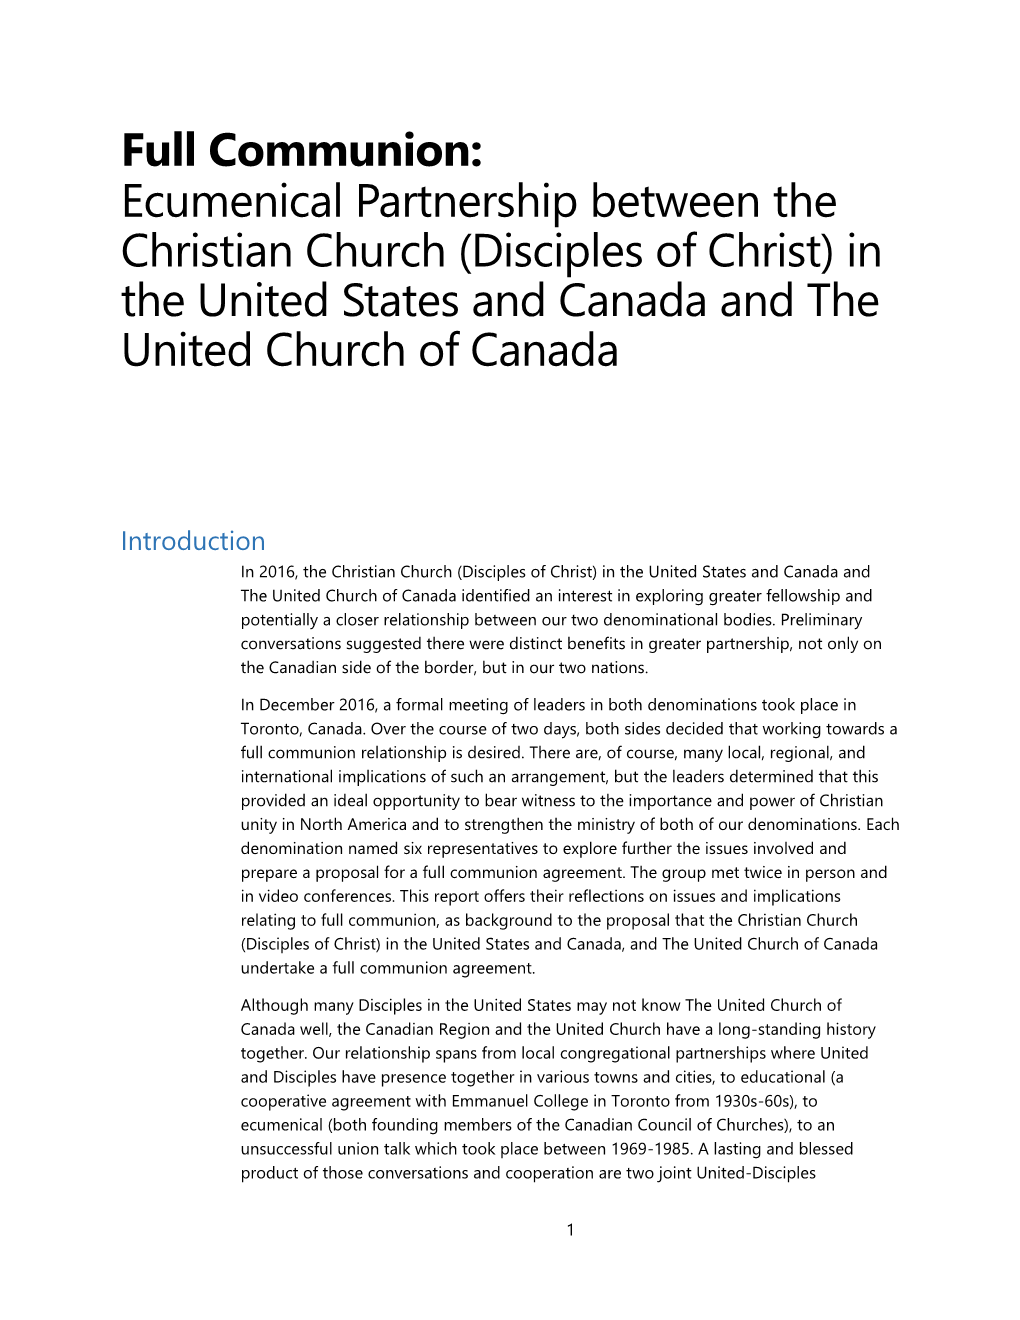 Full Communion: Ecumenical Partnership Between the Christian Church (Disciples of Christ) in the United States and Canada and the United Church of Canada